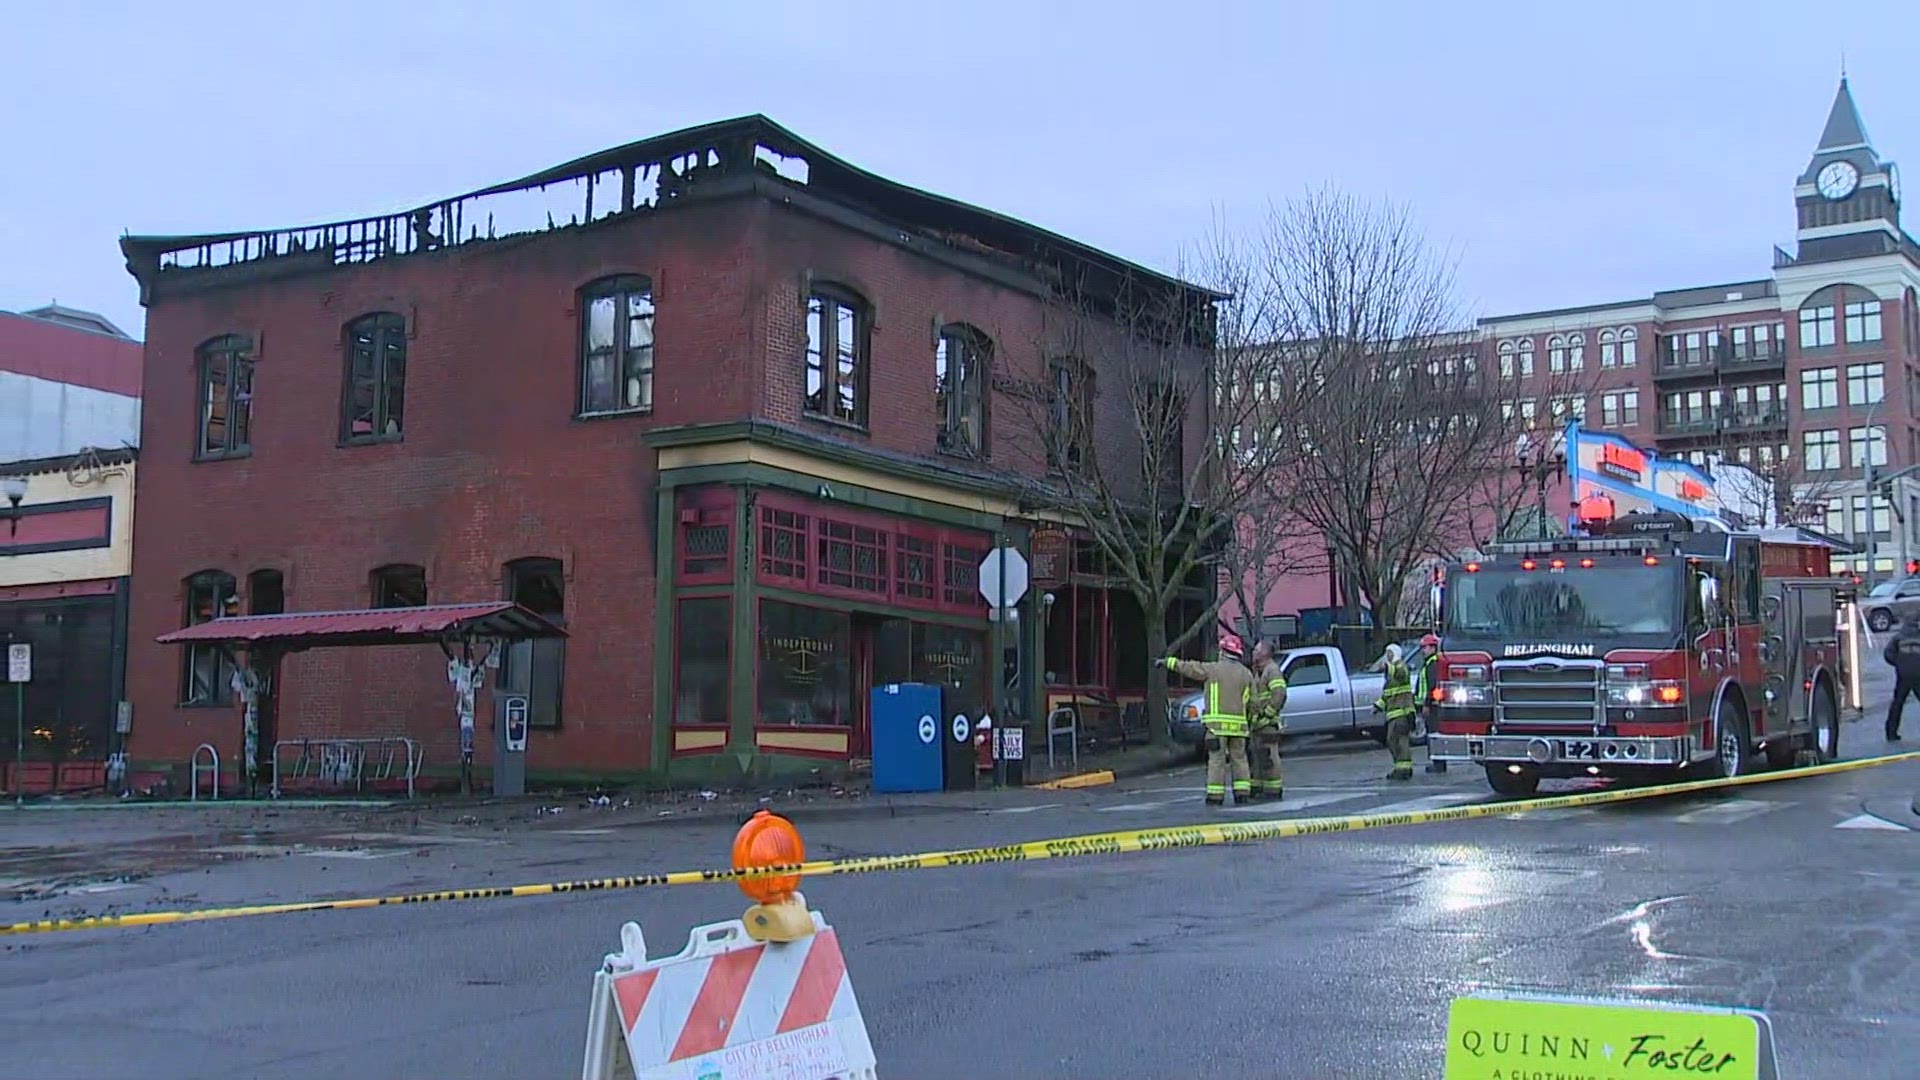 The historic Fairhaven Terminal Building is "extensively damaged and unstable" after an overnight fire broke out in Bellingham.